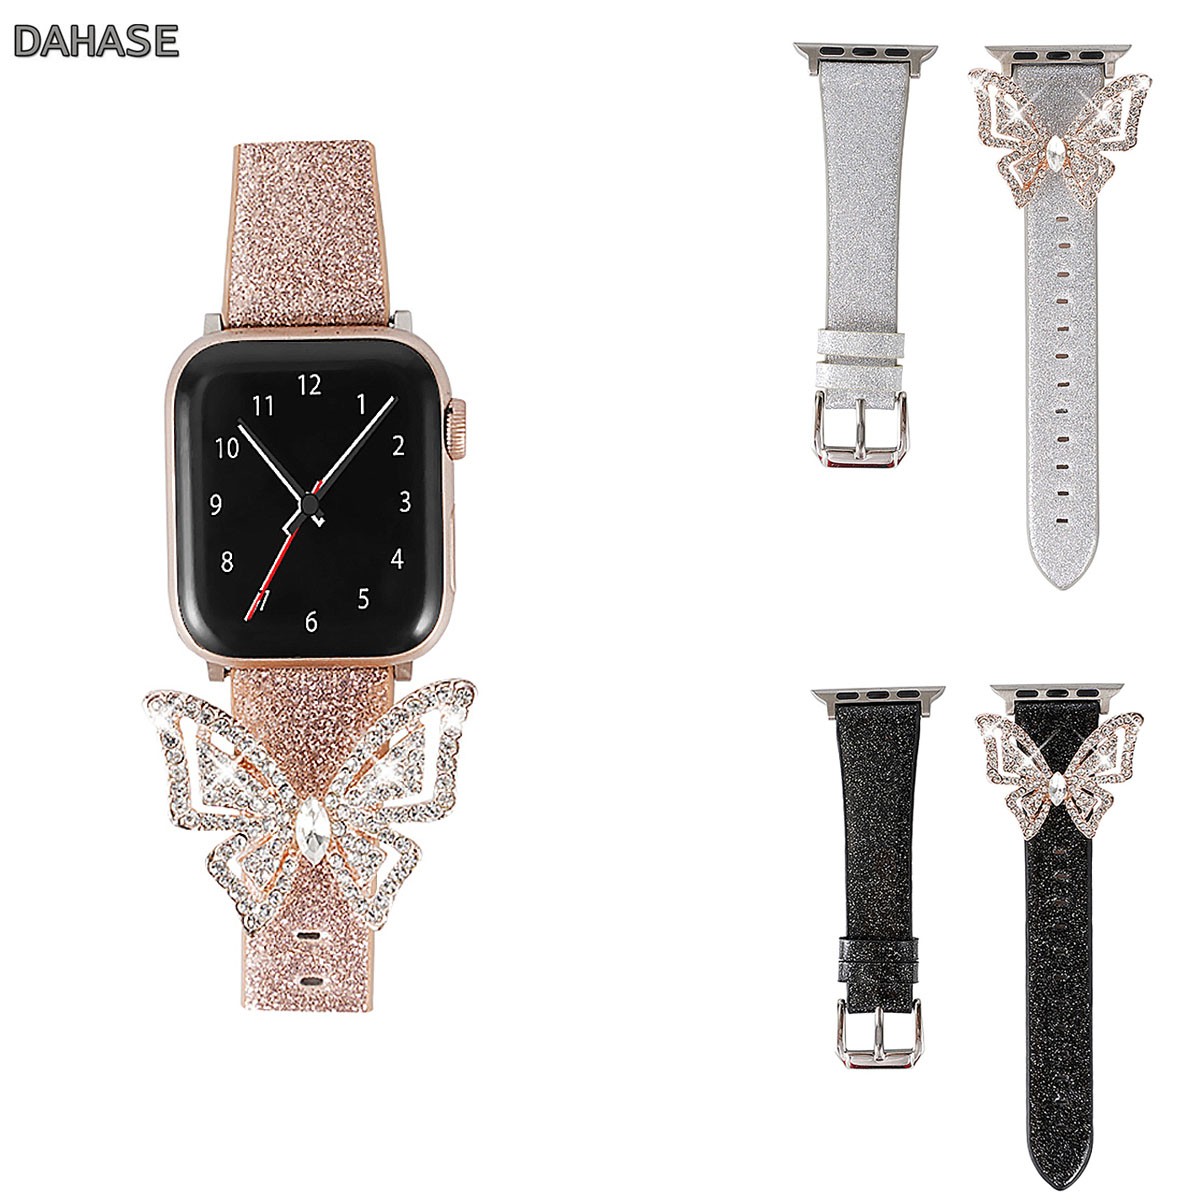 Glossy Leather Strap for Apple Watch Series 1 2 3 4 5 6 SE Diamond Band for 38 40 42 44mm iWatch